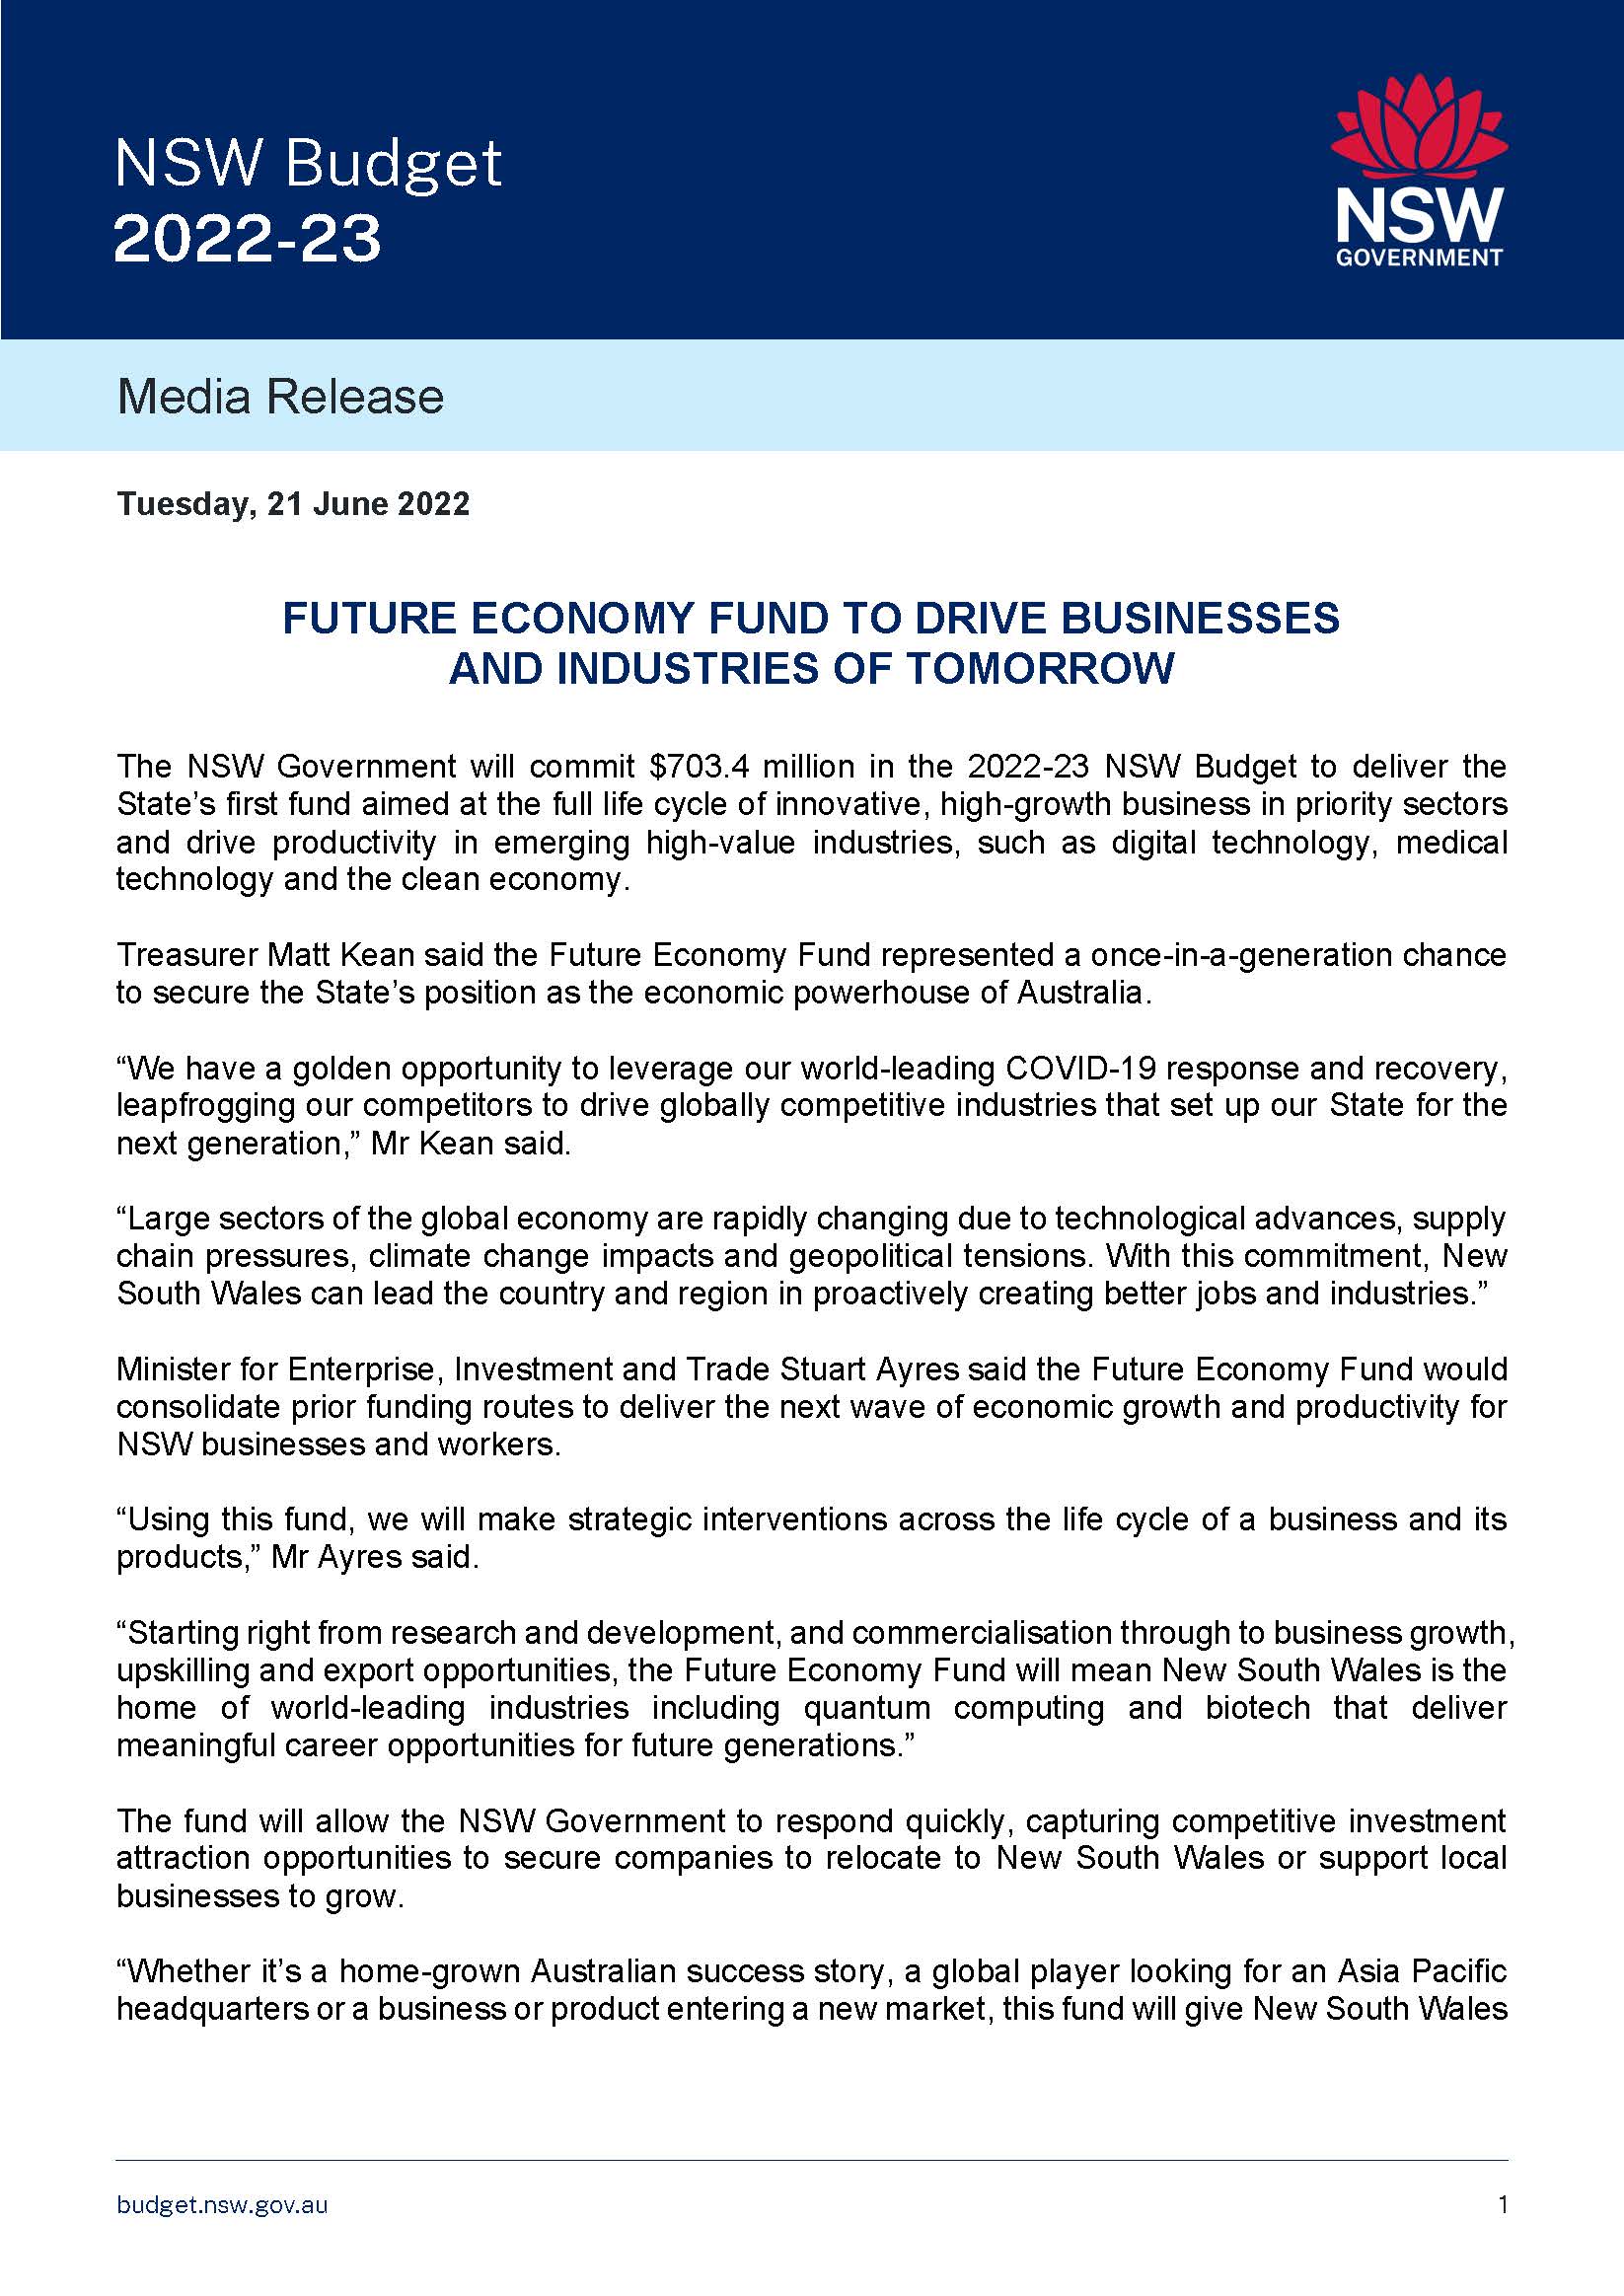 The NSW Government will commit $703.4 million in the 2022-23 NSW Budget to deliver the State’s first fund aimed at the full life cycle of innovative, high-growth business in priority sectors and drive productivity in emerging high-value industries, such as digital technology, medical technology and the clean economy.  Treasurer Matt Kean said the Future Economy Fund represented a once-in-a-generation chance to secure the State’s position as the economic powerhouse of Australia.   “We have a golden opportunity to leverage our world-leading COVID-19 response and recovery, leapfrogging our competitors to drive globally competitive industries that set up our State for the next generation,” Mr Kean said.  “Large sectors of the global economy are rapidly changing due to technological advances, supply chain pressures, climate change impacts and geopolitical tensions. With this commitment, New South Wales can lead the country and region in proactively creating better jobs and industries.”  Minister for Enterprise, Investment and Trade Stuart Ayres said the Future Economy Fund would consolidate prior funding routes to deliver the next wave of economic growth and productivity for NSW businesses and workers.  “Using this fund, we will make strategic interventions across the life cycle of a business and its products,” Mr Ayres said.  “Starting right from research and development, and commercialisation through to business growth, upskilling and export opportunities, the Future Economy Fund will mean New South Wales is the home of world-leading industries including quantum computing and biotech that deliver meaningful career opportunities for future generations.”  The fund will allow the NSW Government to respond quickly, capturing competitive investment attraction opportunities to secure companies to relocate to New South Wales or support local businesses to grow.   “Whether it’s a home-grown Australian success story, a global player looking for an Asia Pacific headquarters or a business or product entering a new market, this